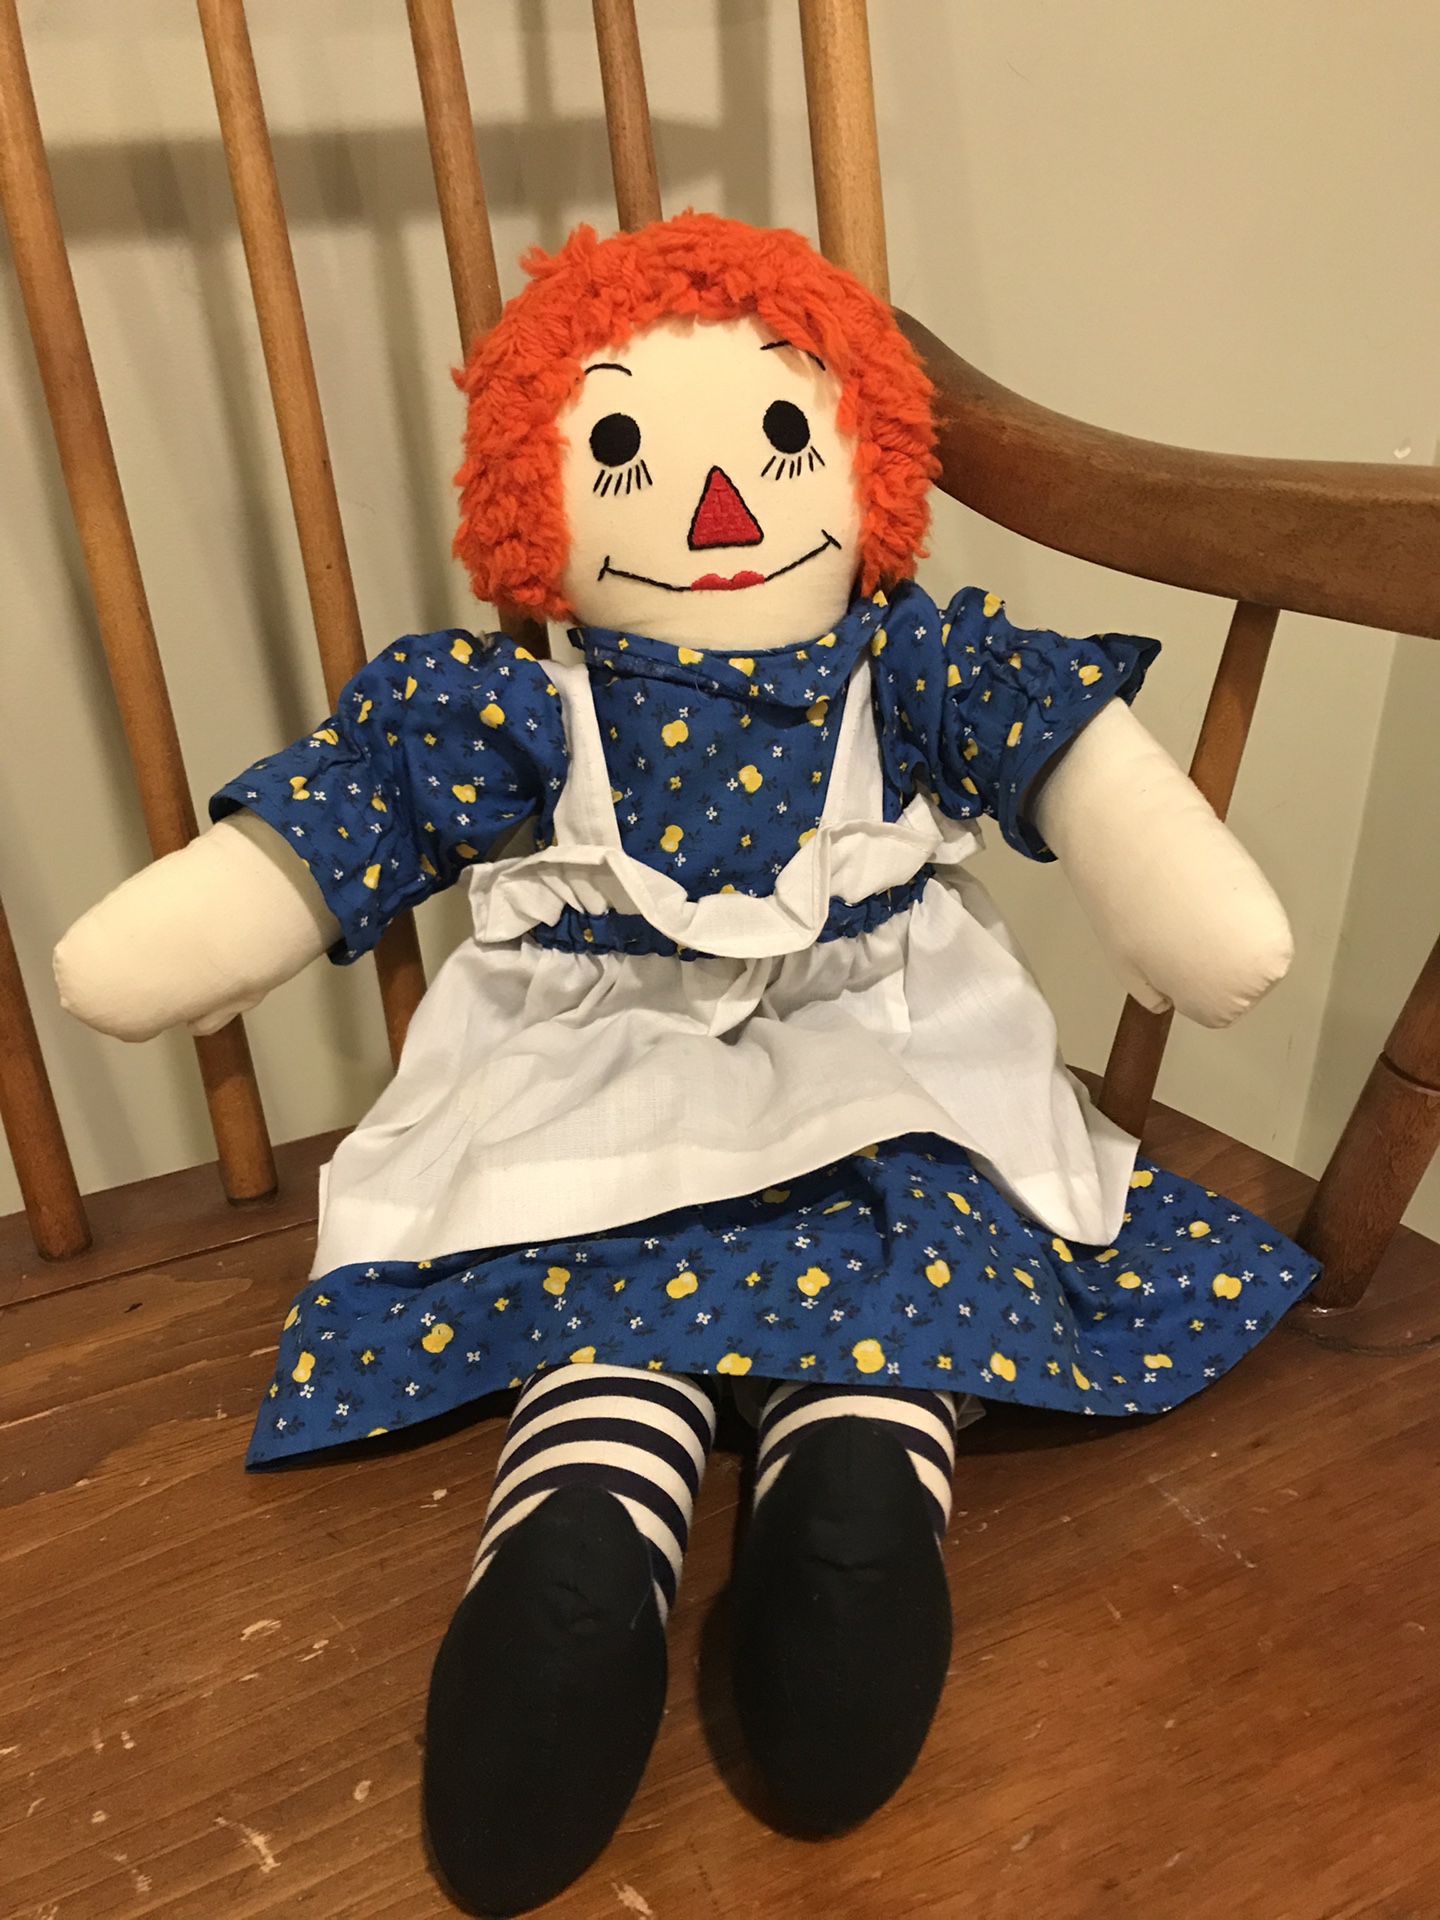 Vintage Raggedy Ann and Andy 20” tall homemade dolls $40 for both